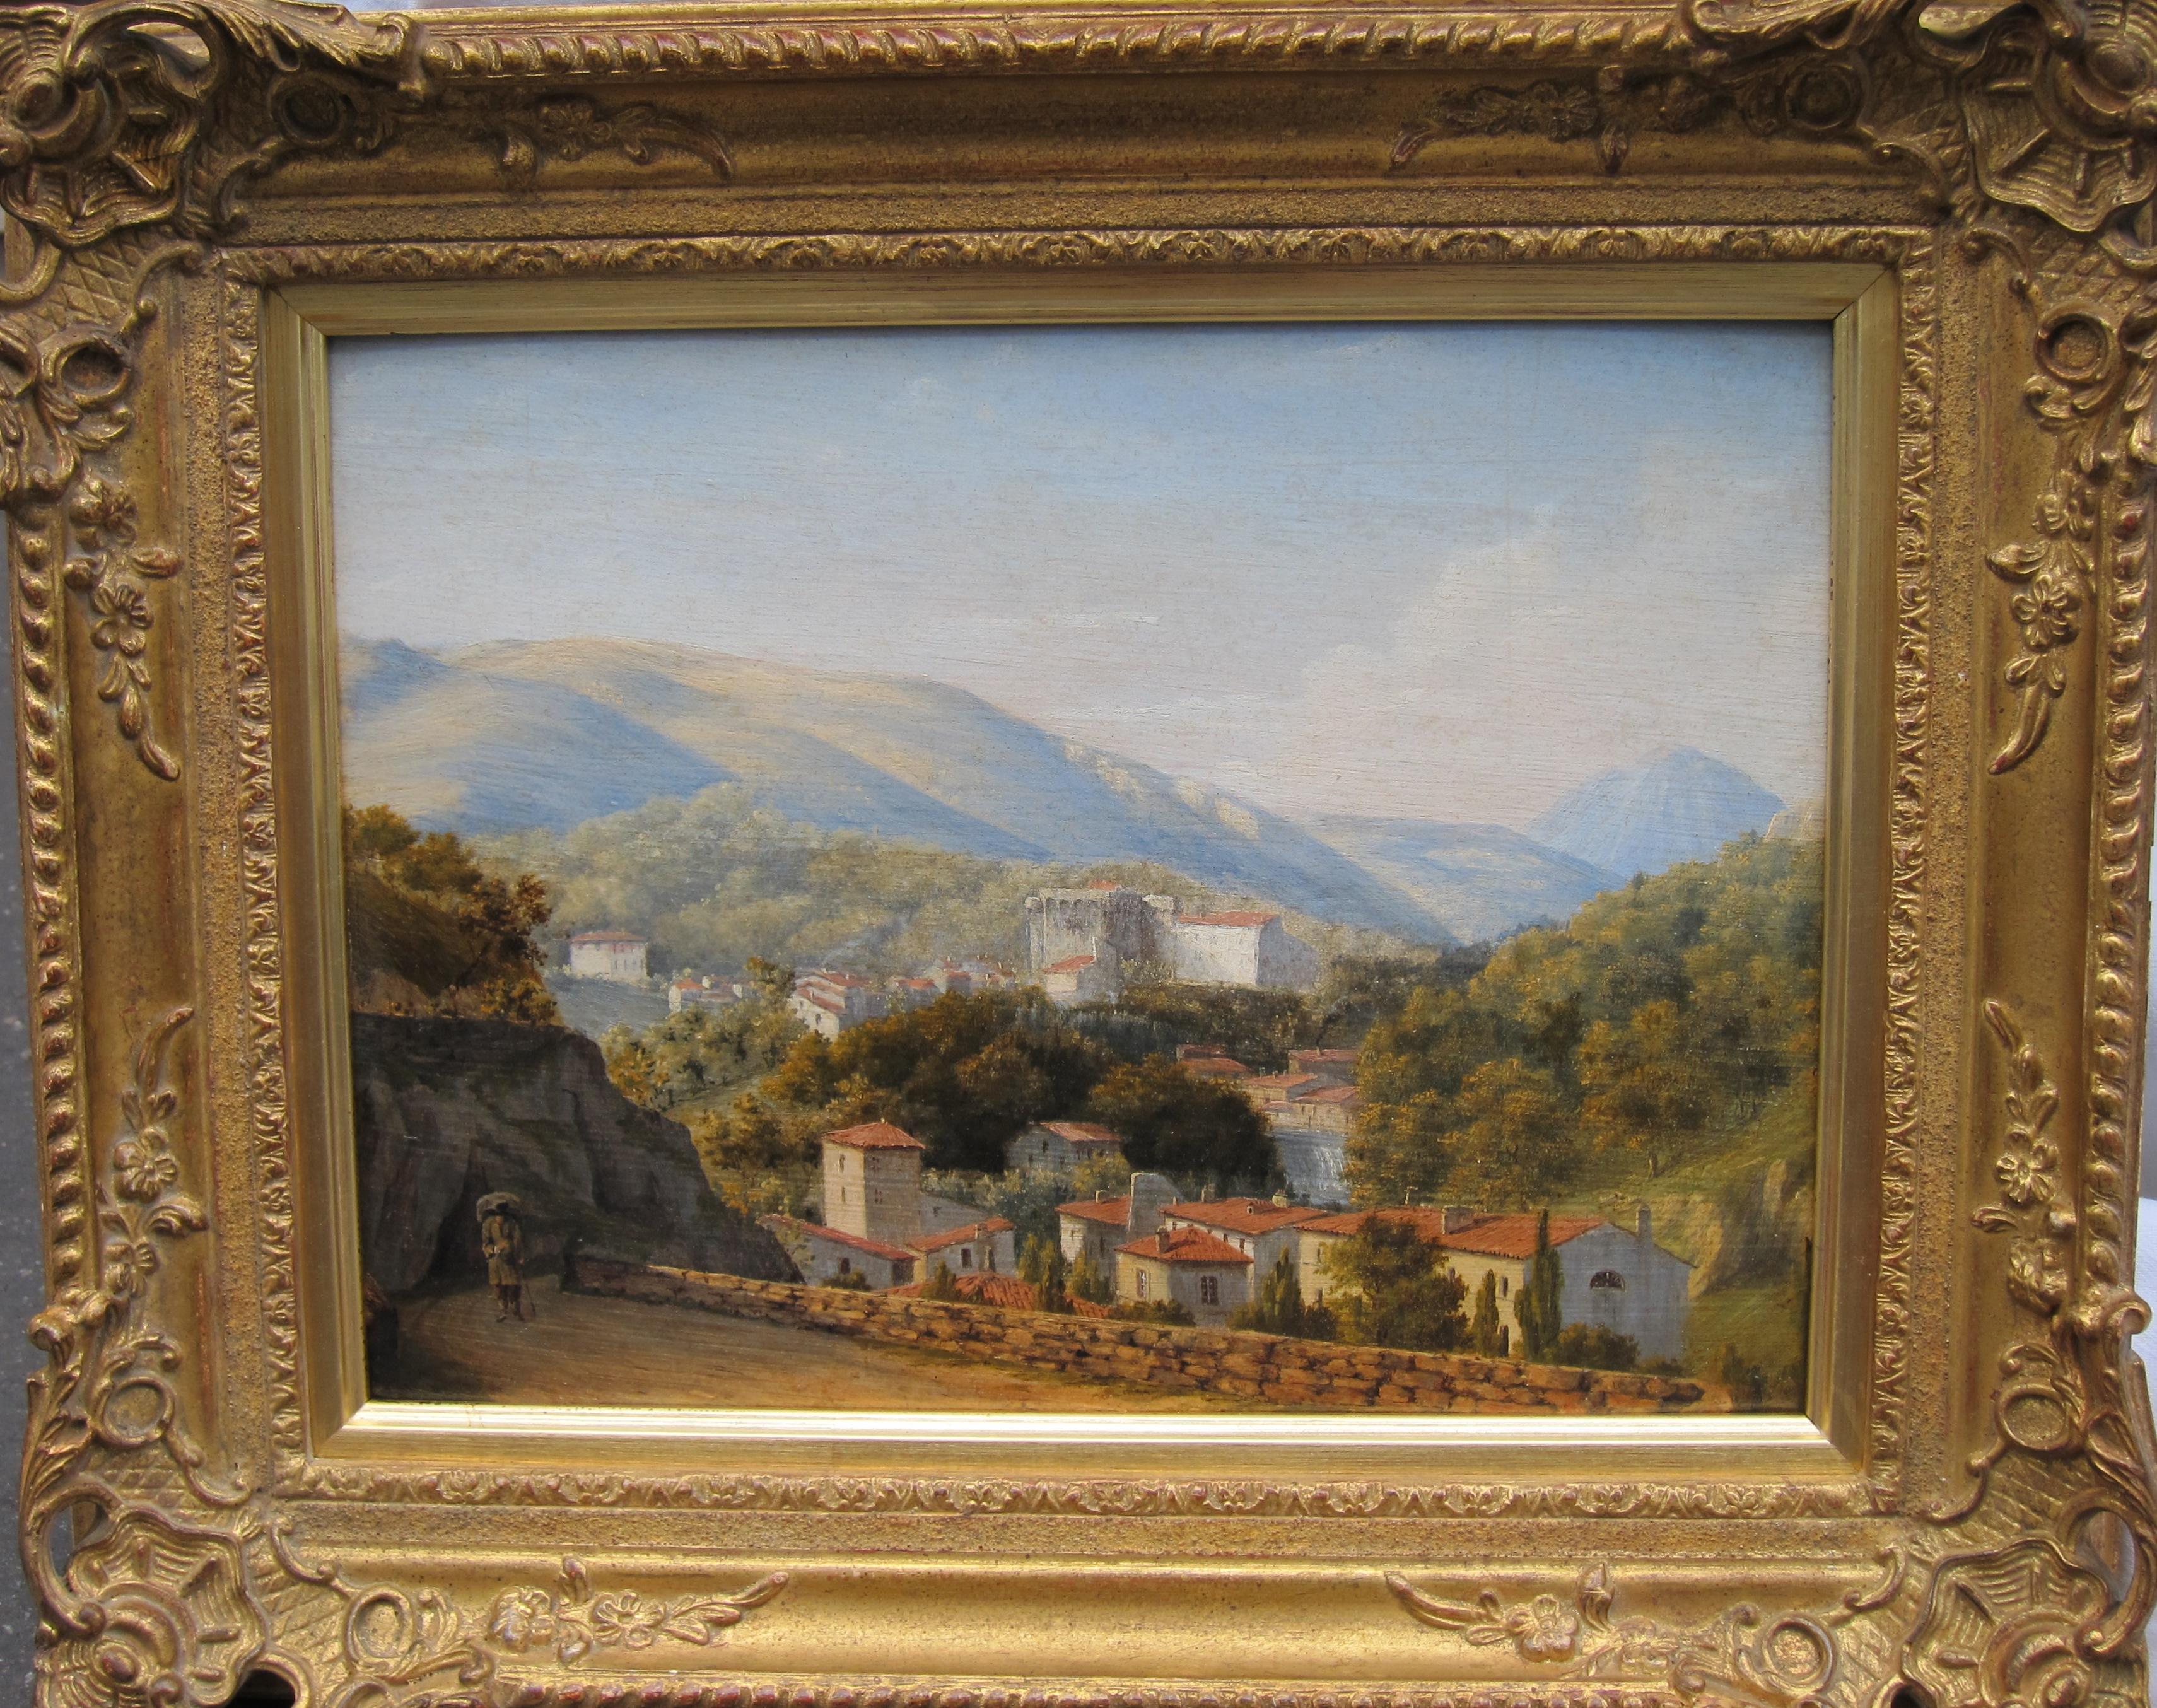 View of Royat, Puy-de-Dôme, circa 1830 - Painting by Unknown